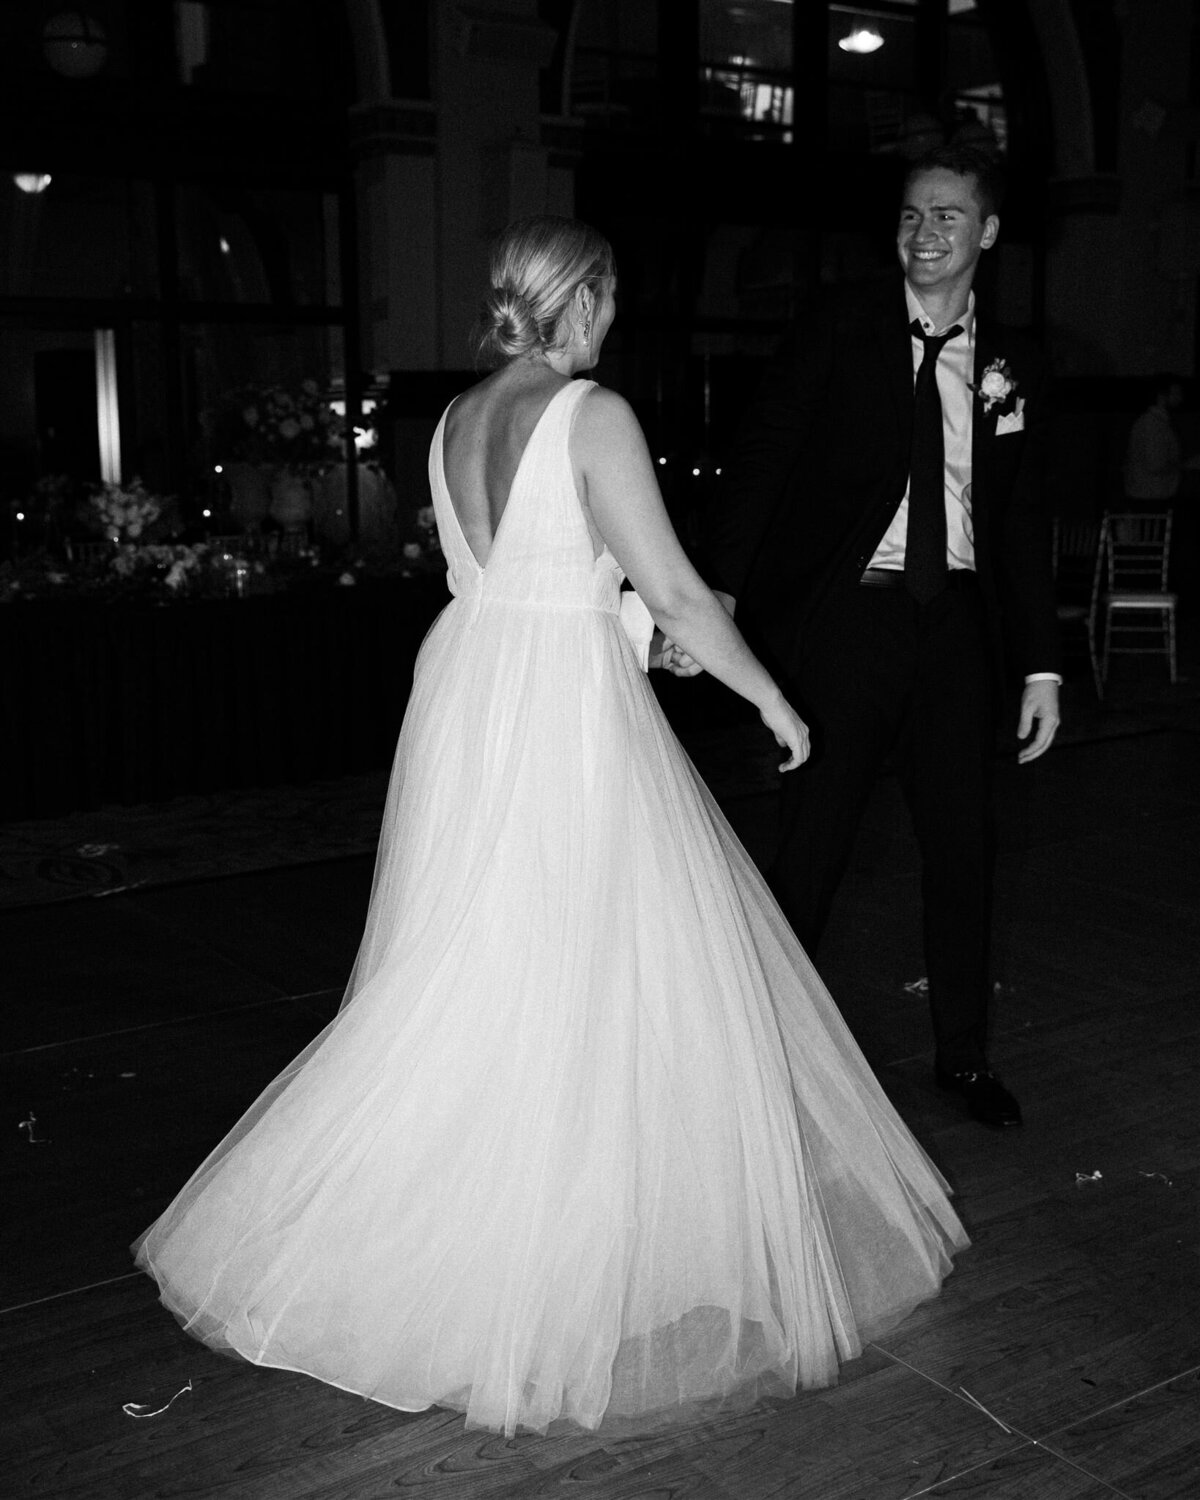 First dance for Bride and Groom